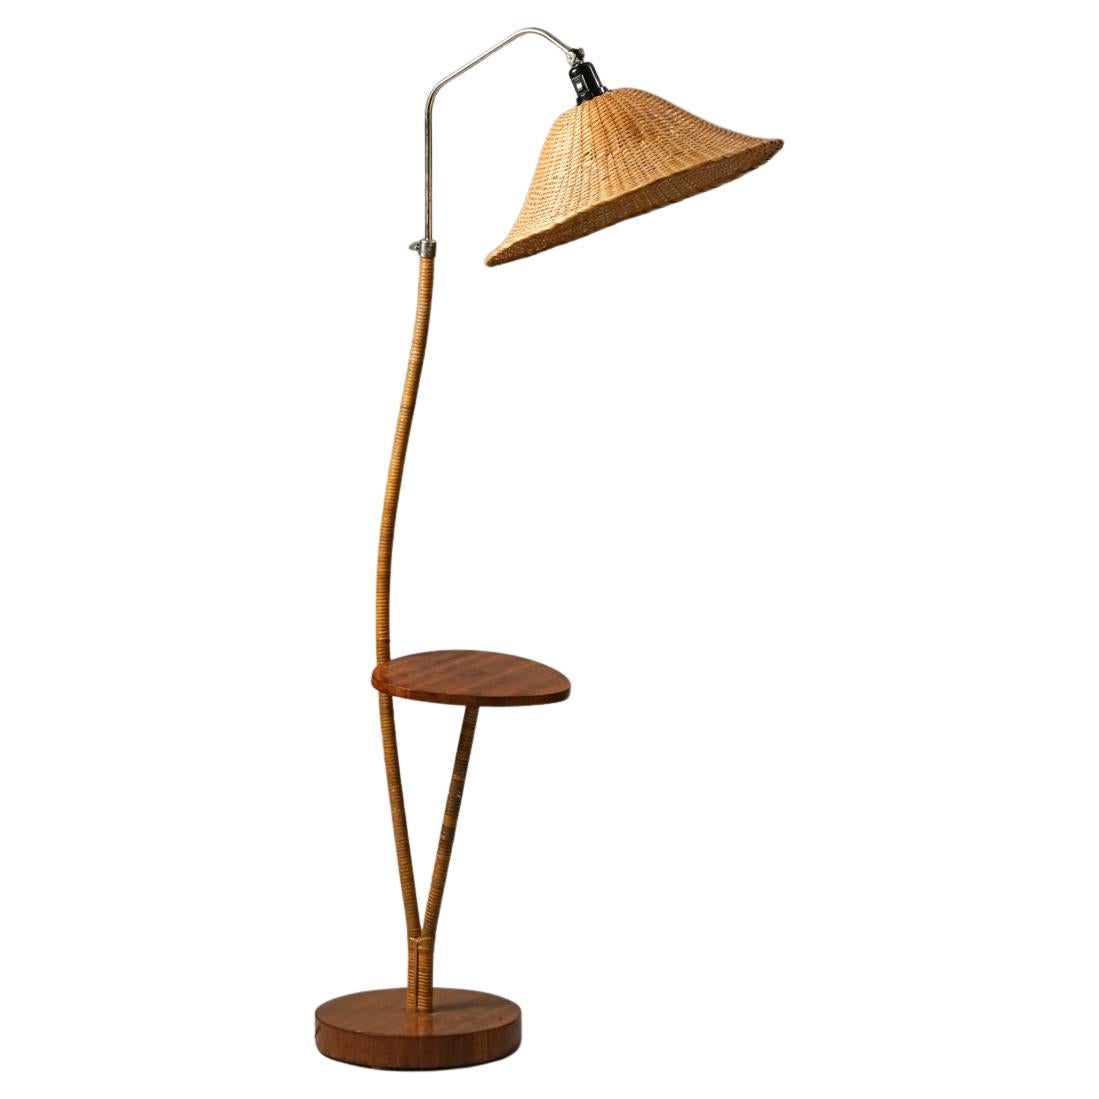 Finnish Rattan Floorlamp With Serving Table, 1950s